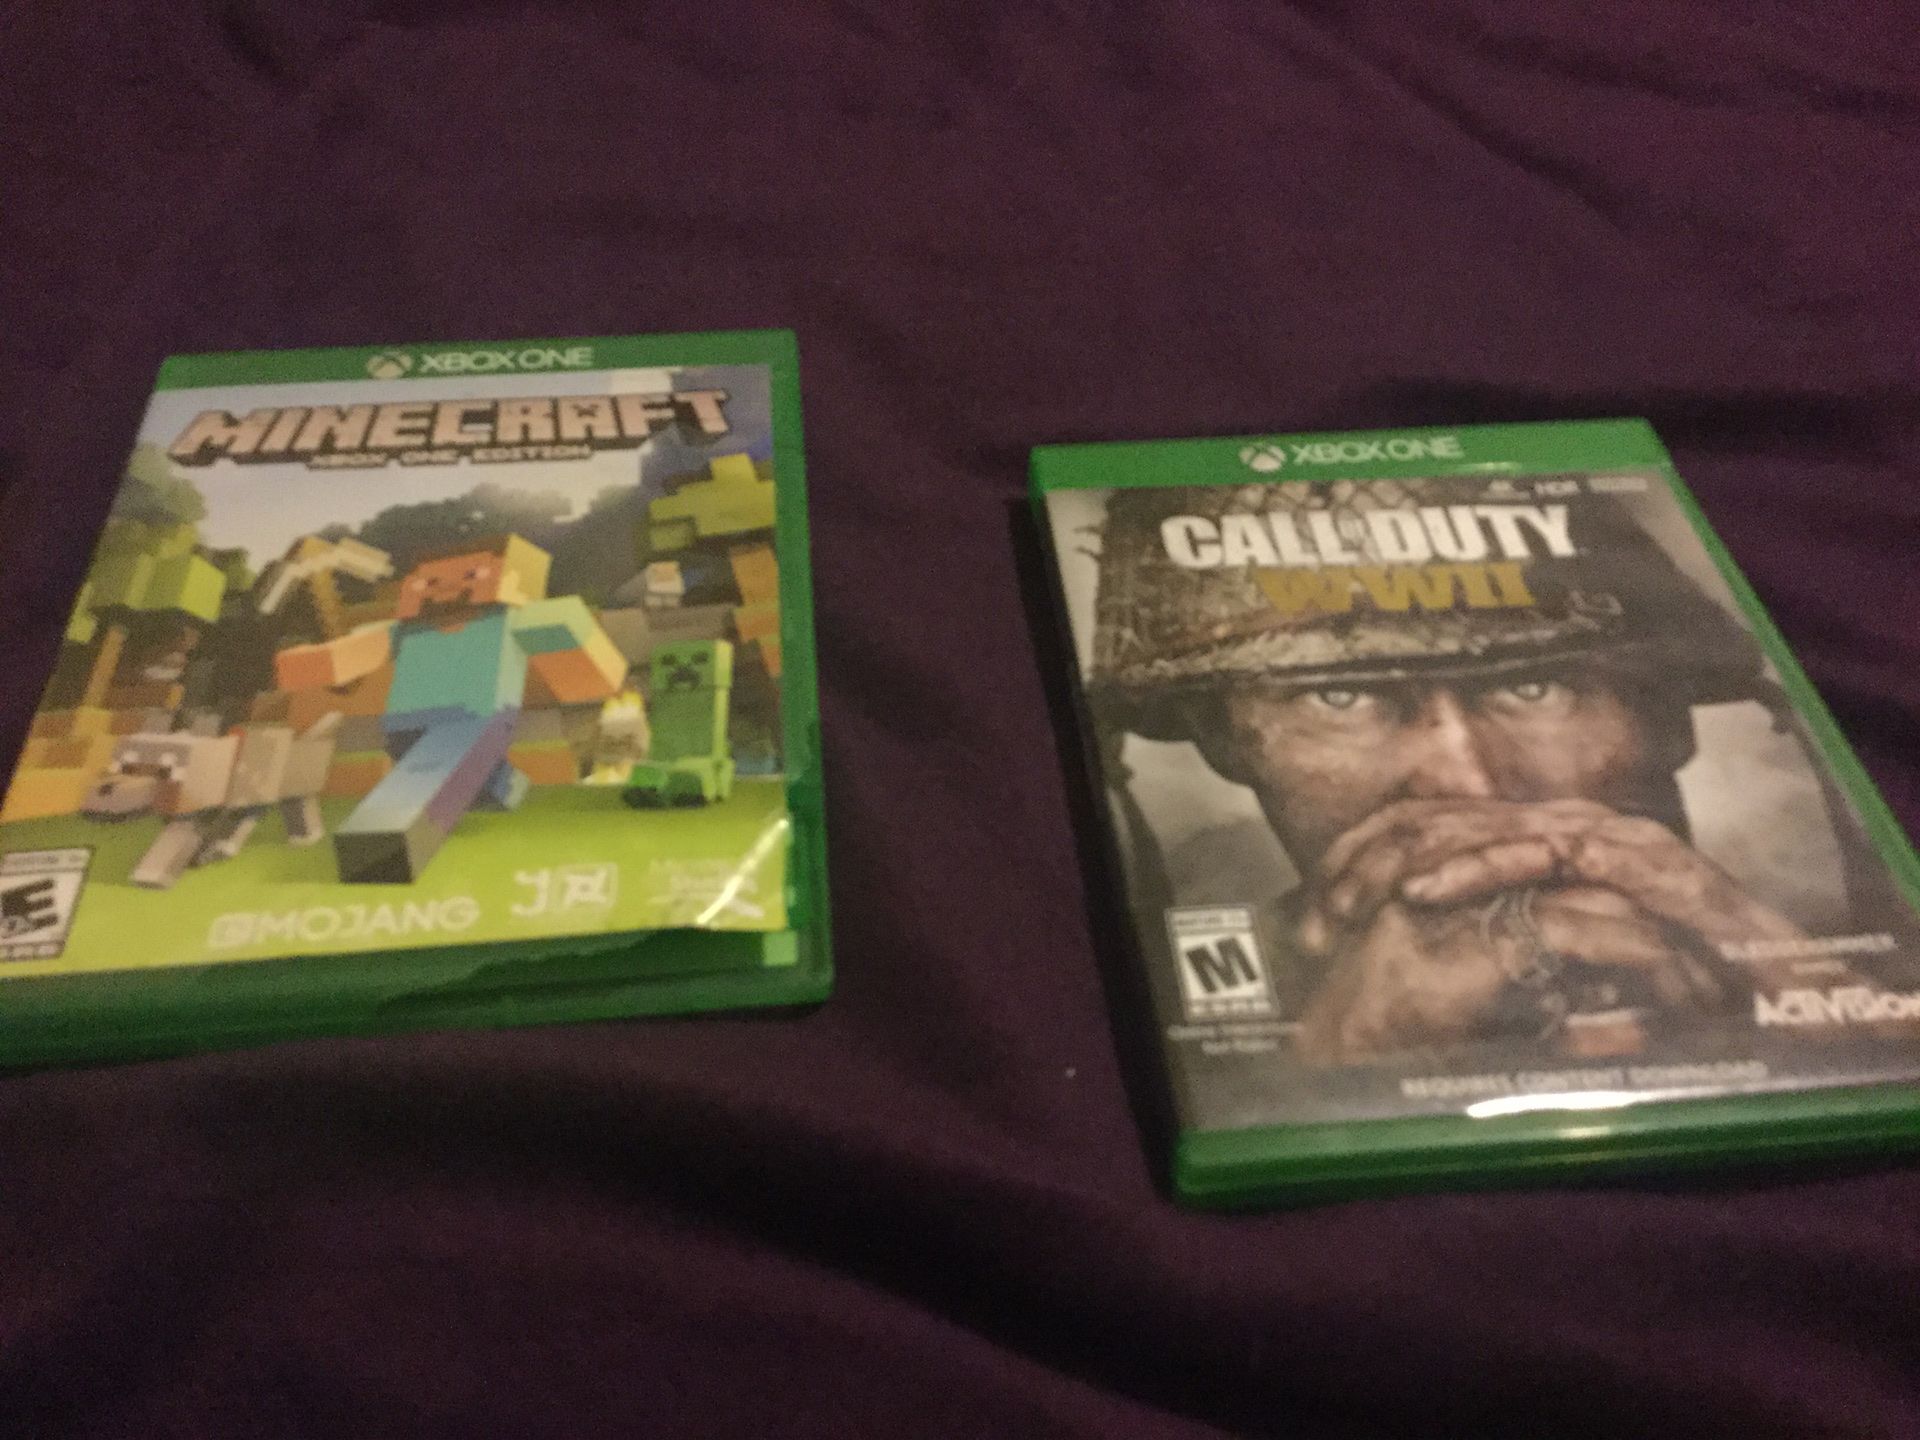 Perfect condition discs call of duty ww2 is new and Minecraft is 1 year old